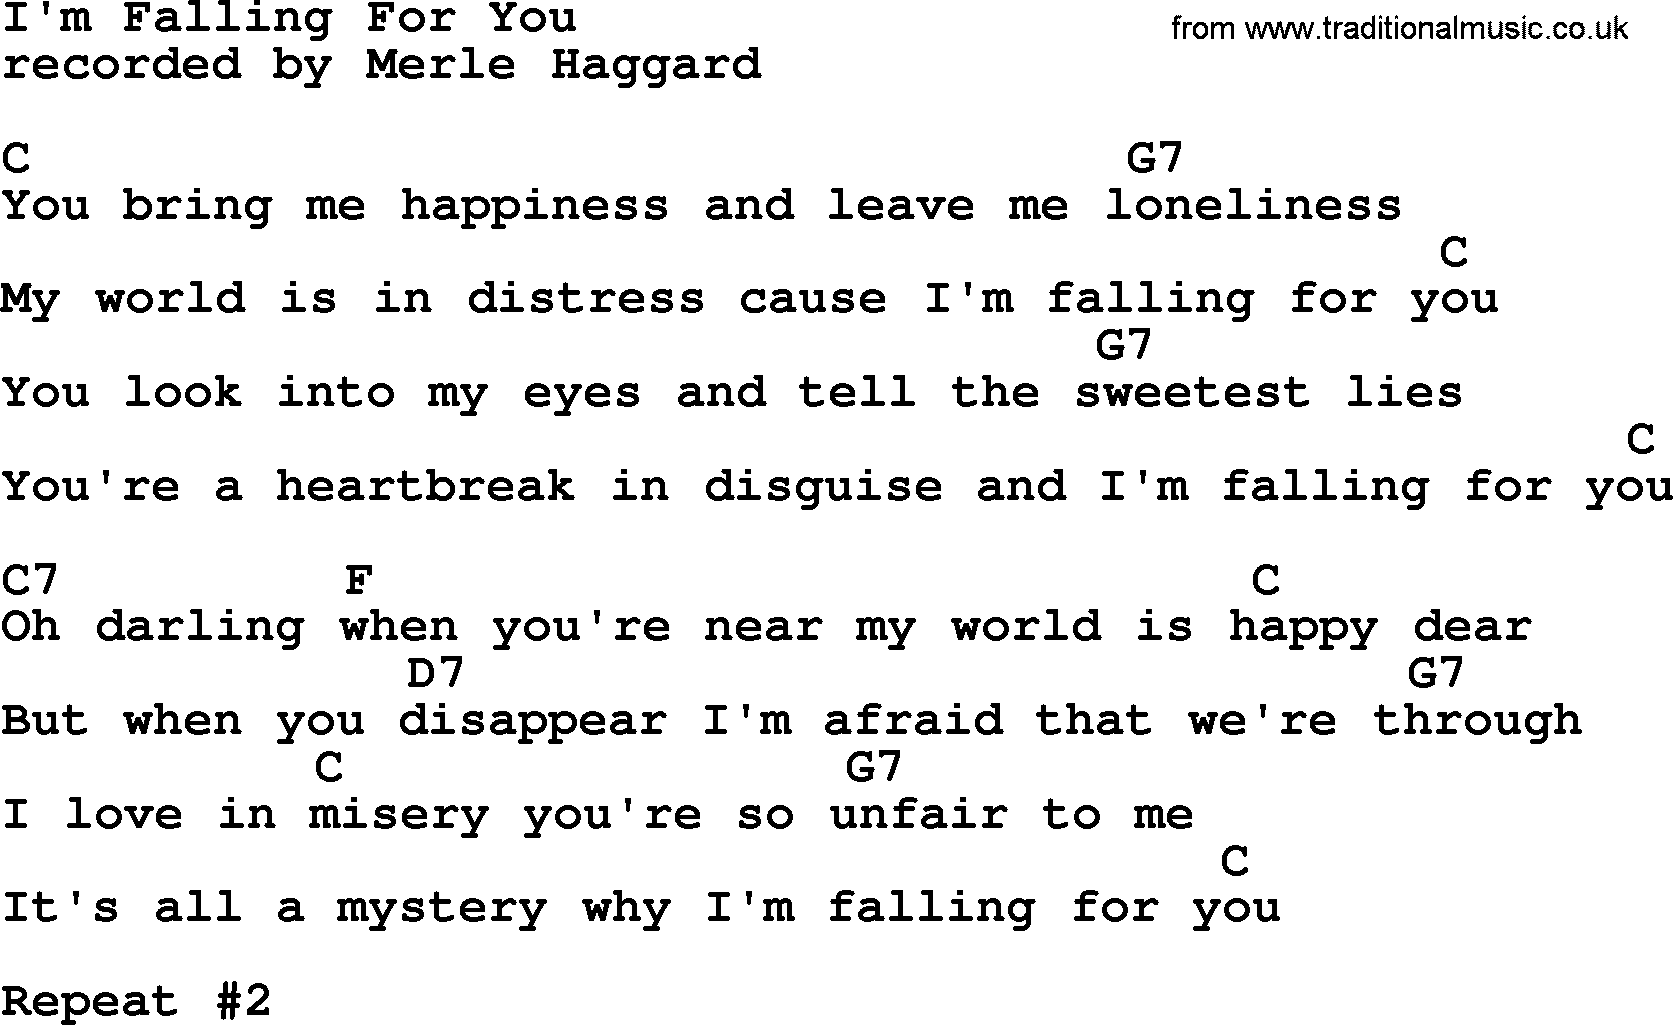 Merle Haggard song: I'm Falling For You, lyrics and chords